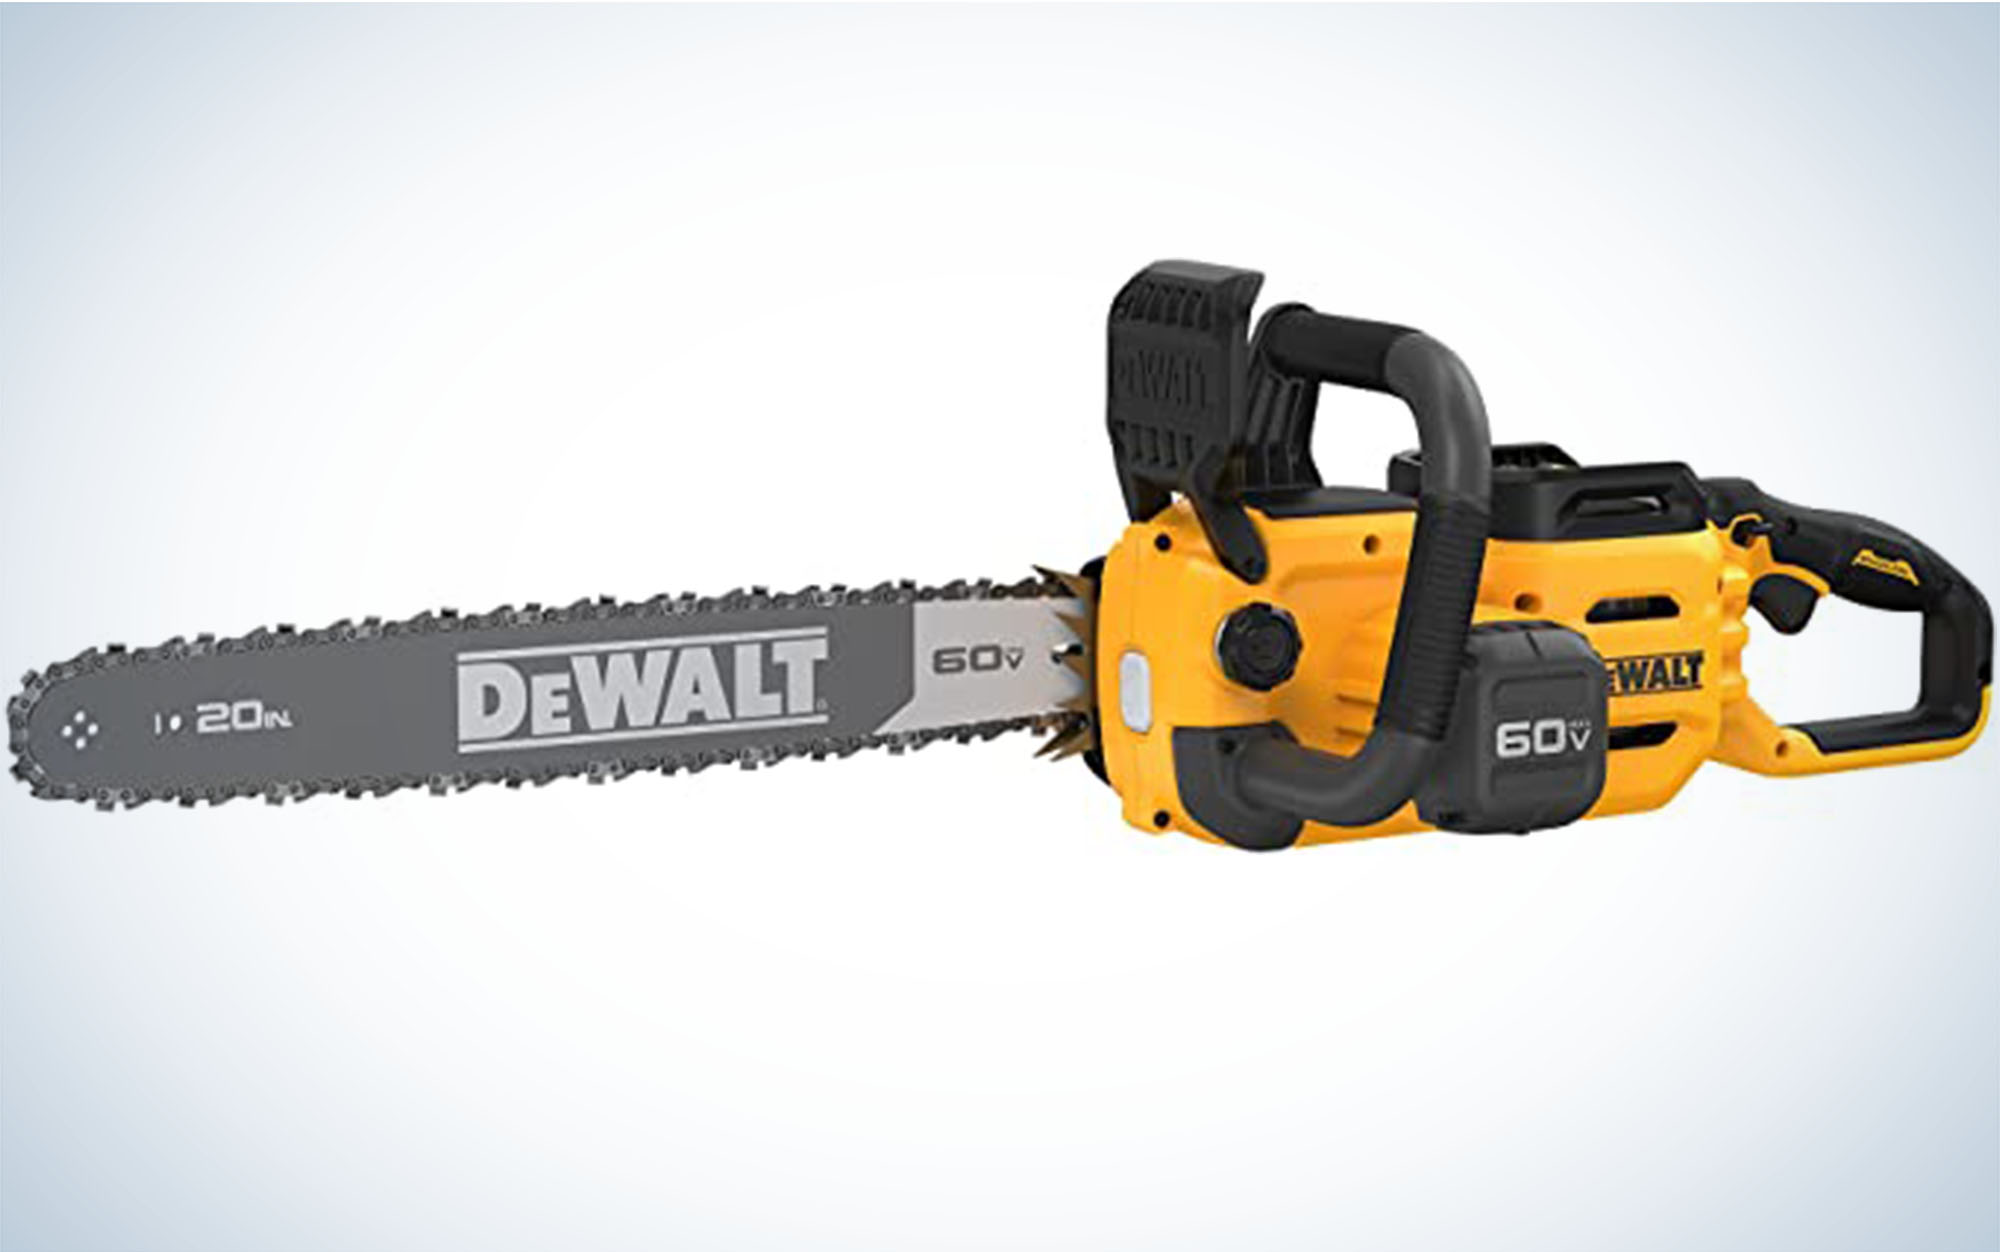 The DeWalt 60V MaxÂ is one of the best chainsaws.